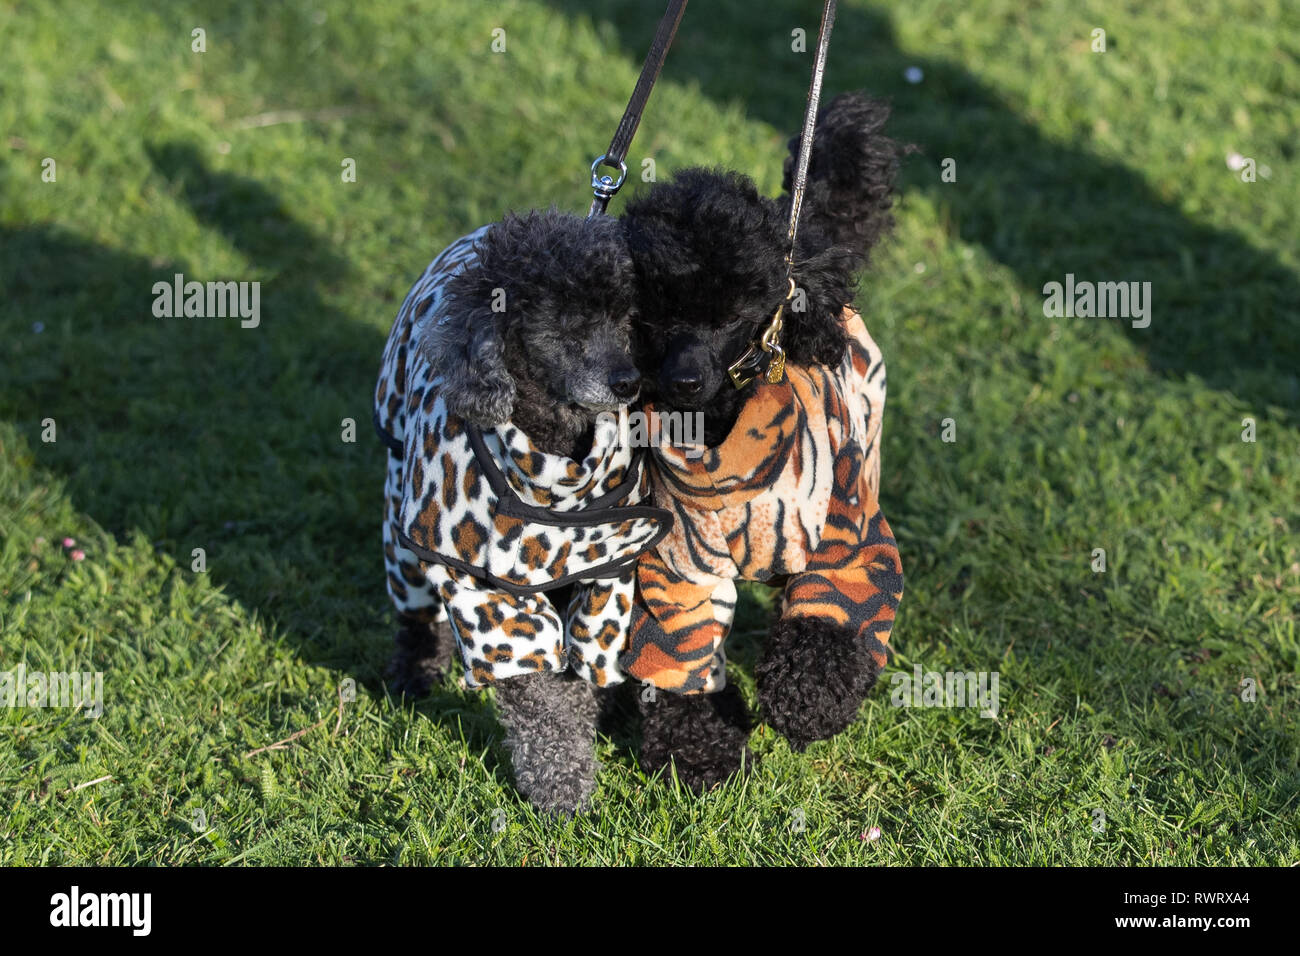 Two Toy Poodles arrive at the Birmingham National Exhibition Centre (NEC) for the first day of the Crufts Dog Show. Stock Photo